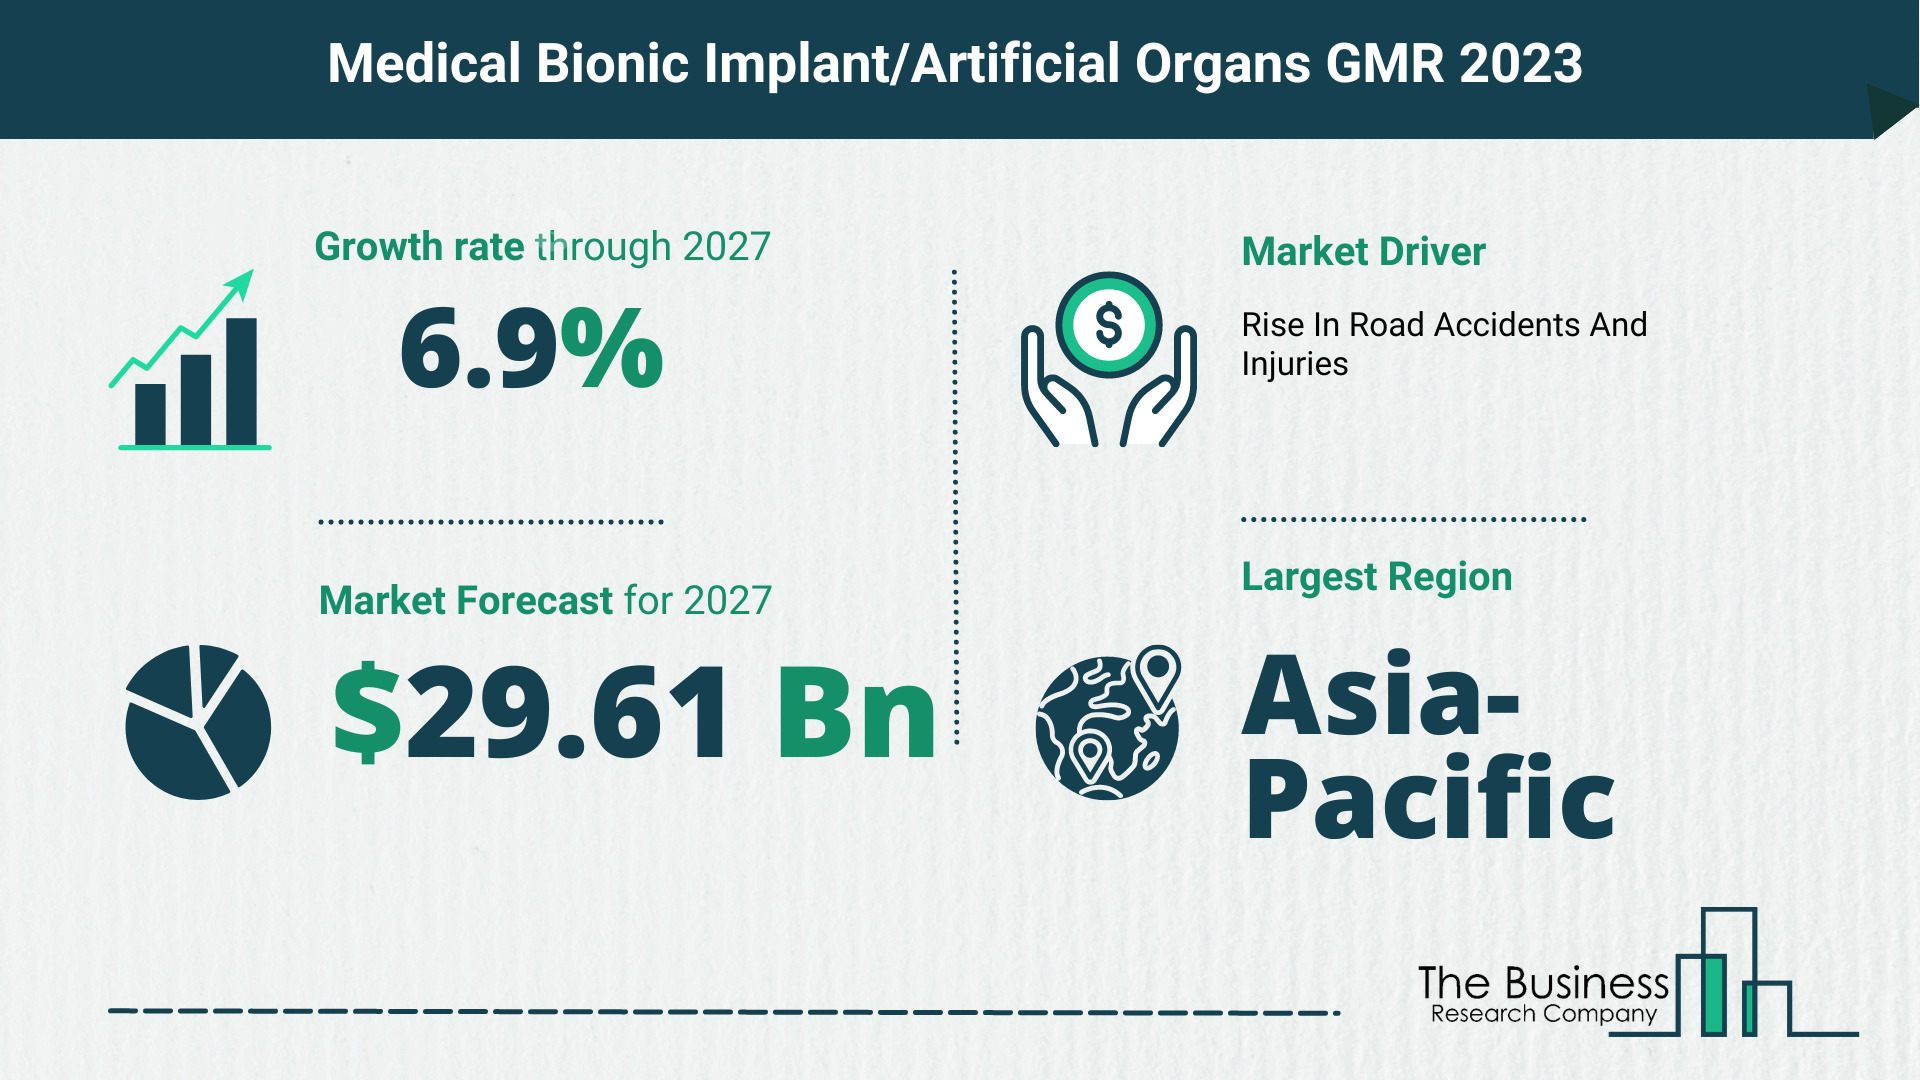 Global Medical Bionic Implant Or Artificial Organs Market Opportunities And Strategies 2023